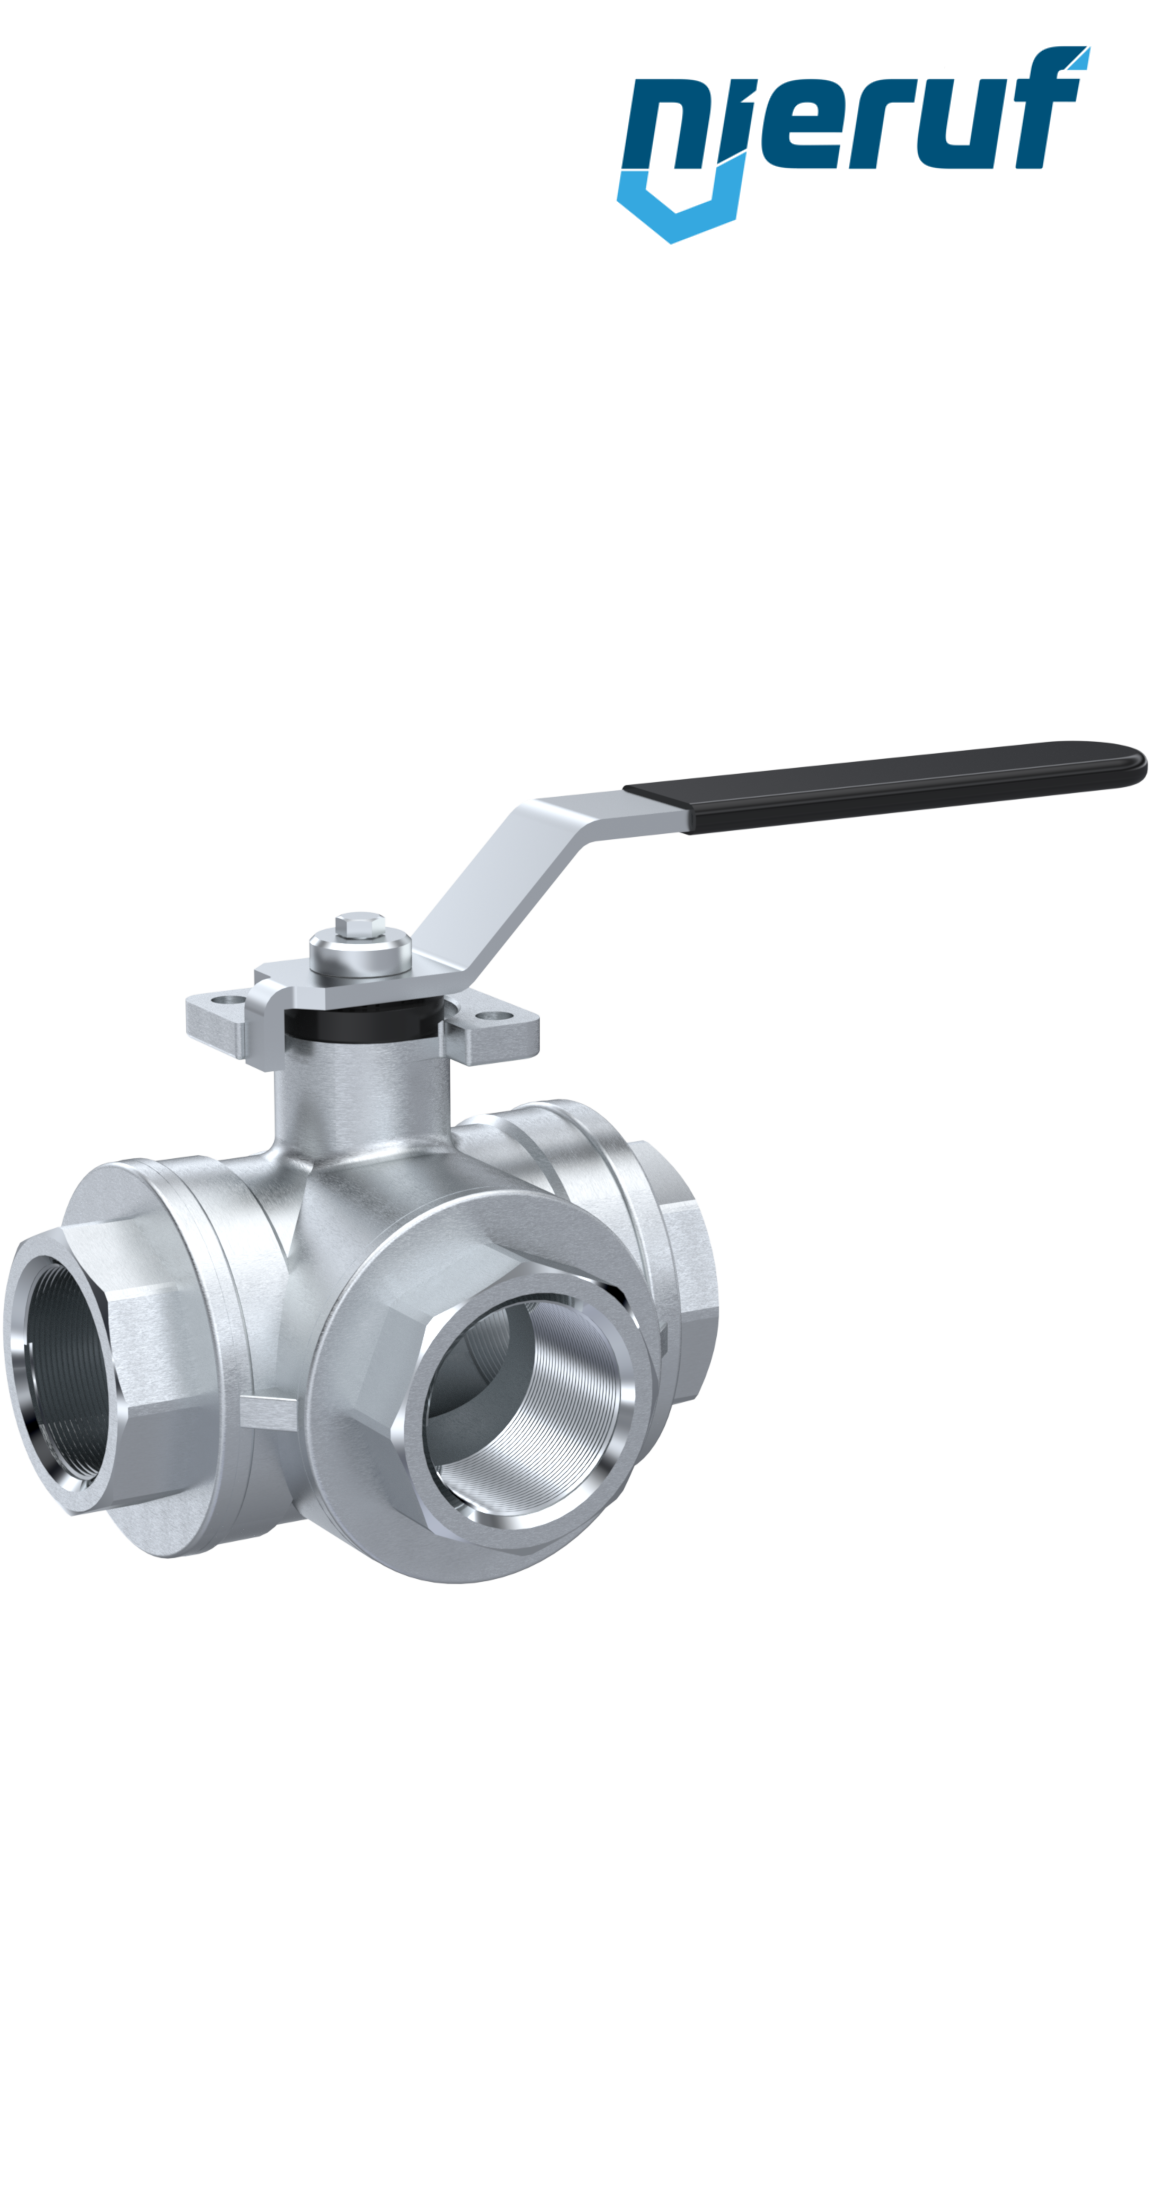 3  way brass ball valve DN20 - 3/4" inch GK08 full port design with L drilling